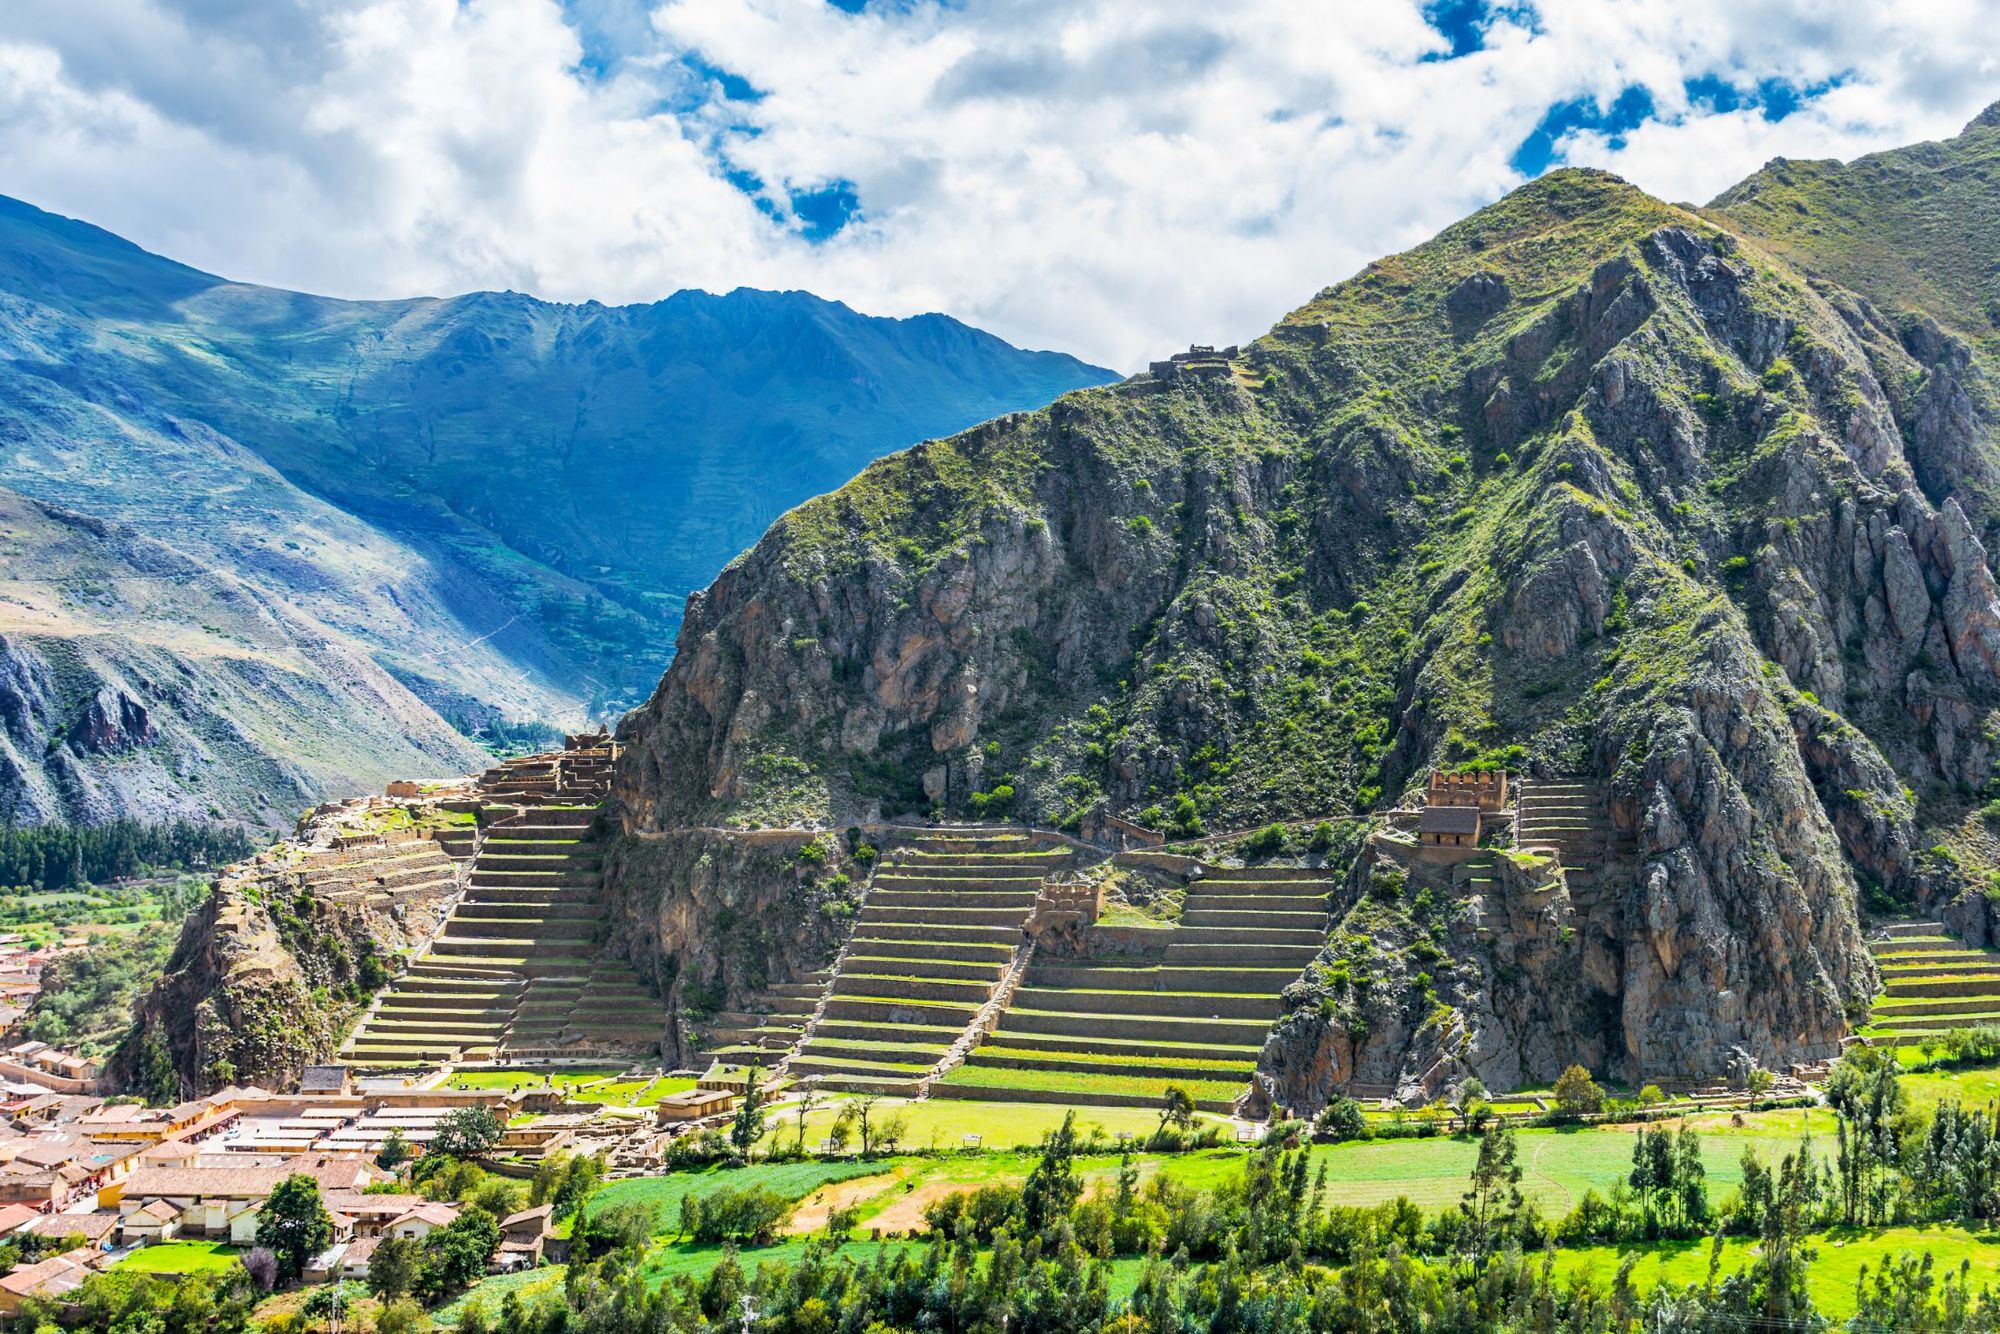 The terraces and towers of Ollantaytambo, the royal estate of Emperor Pachacuti. Photo: Getty